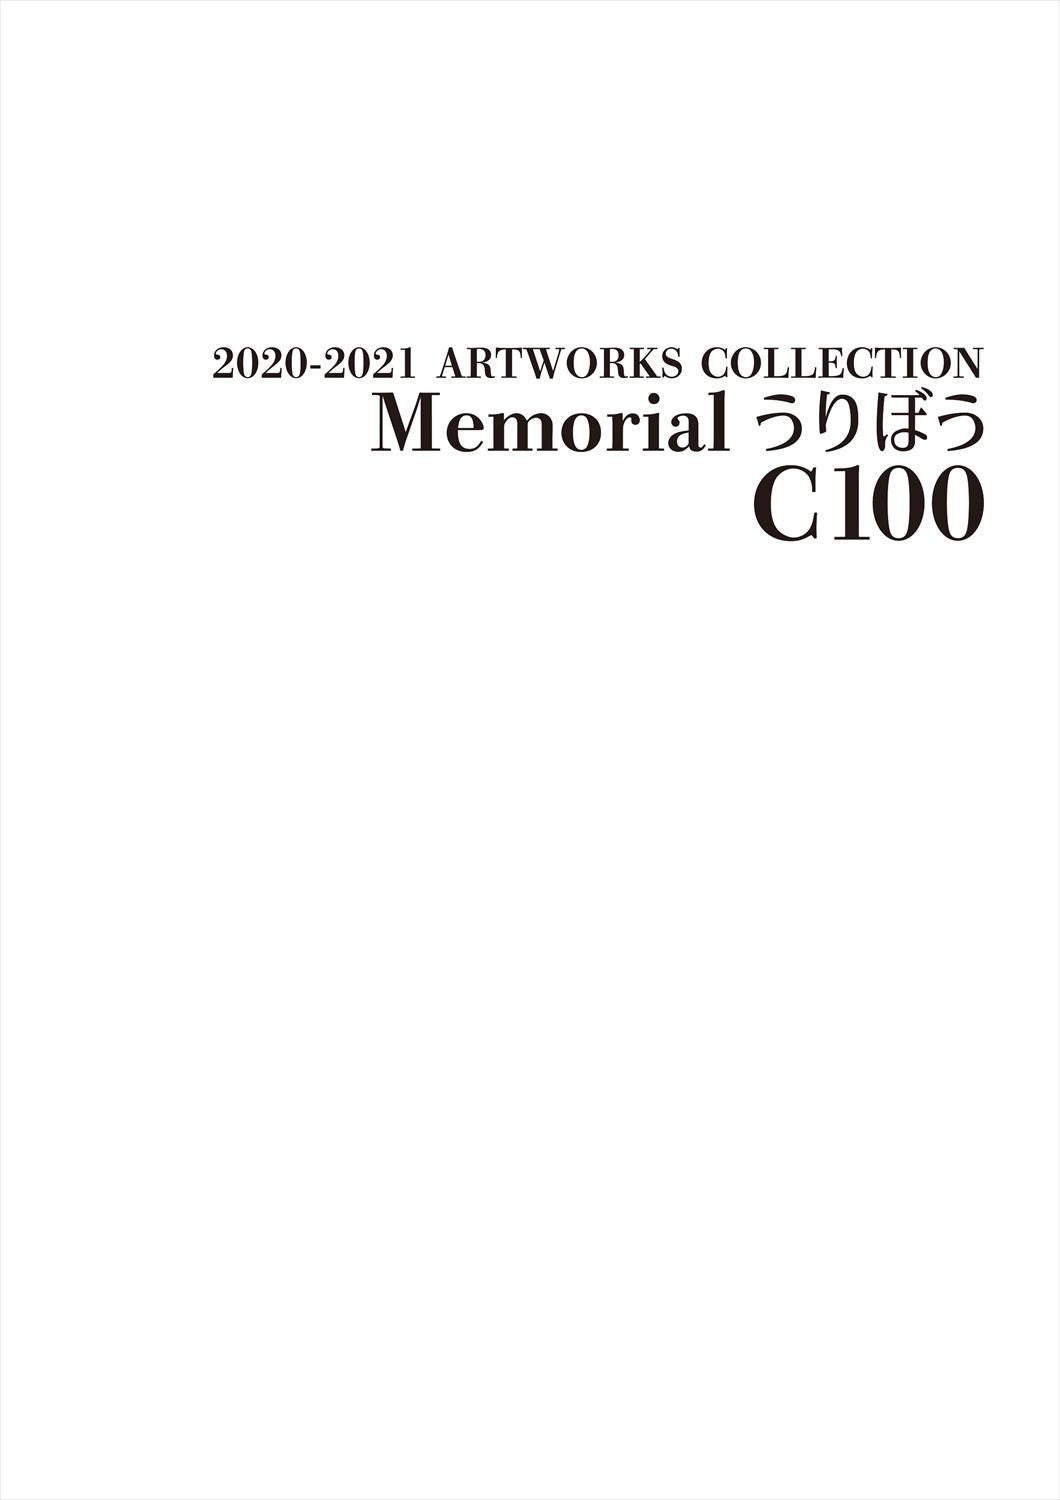 Best Blowjobs 「C100 Memorial うりぼう 2020-2021ARTWORKS COLLECTION」 Free Blow Job Porn - Picture 2